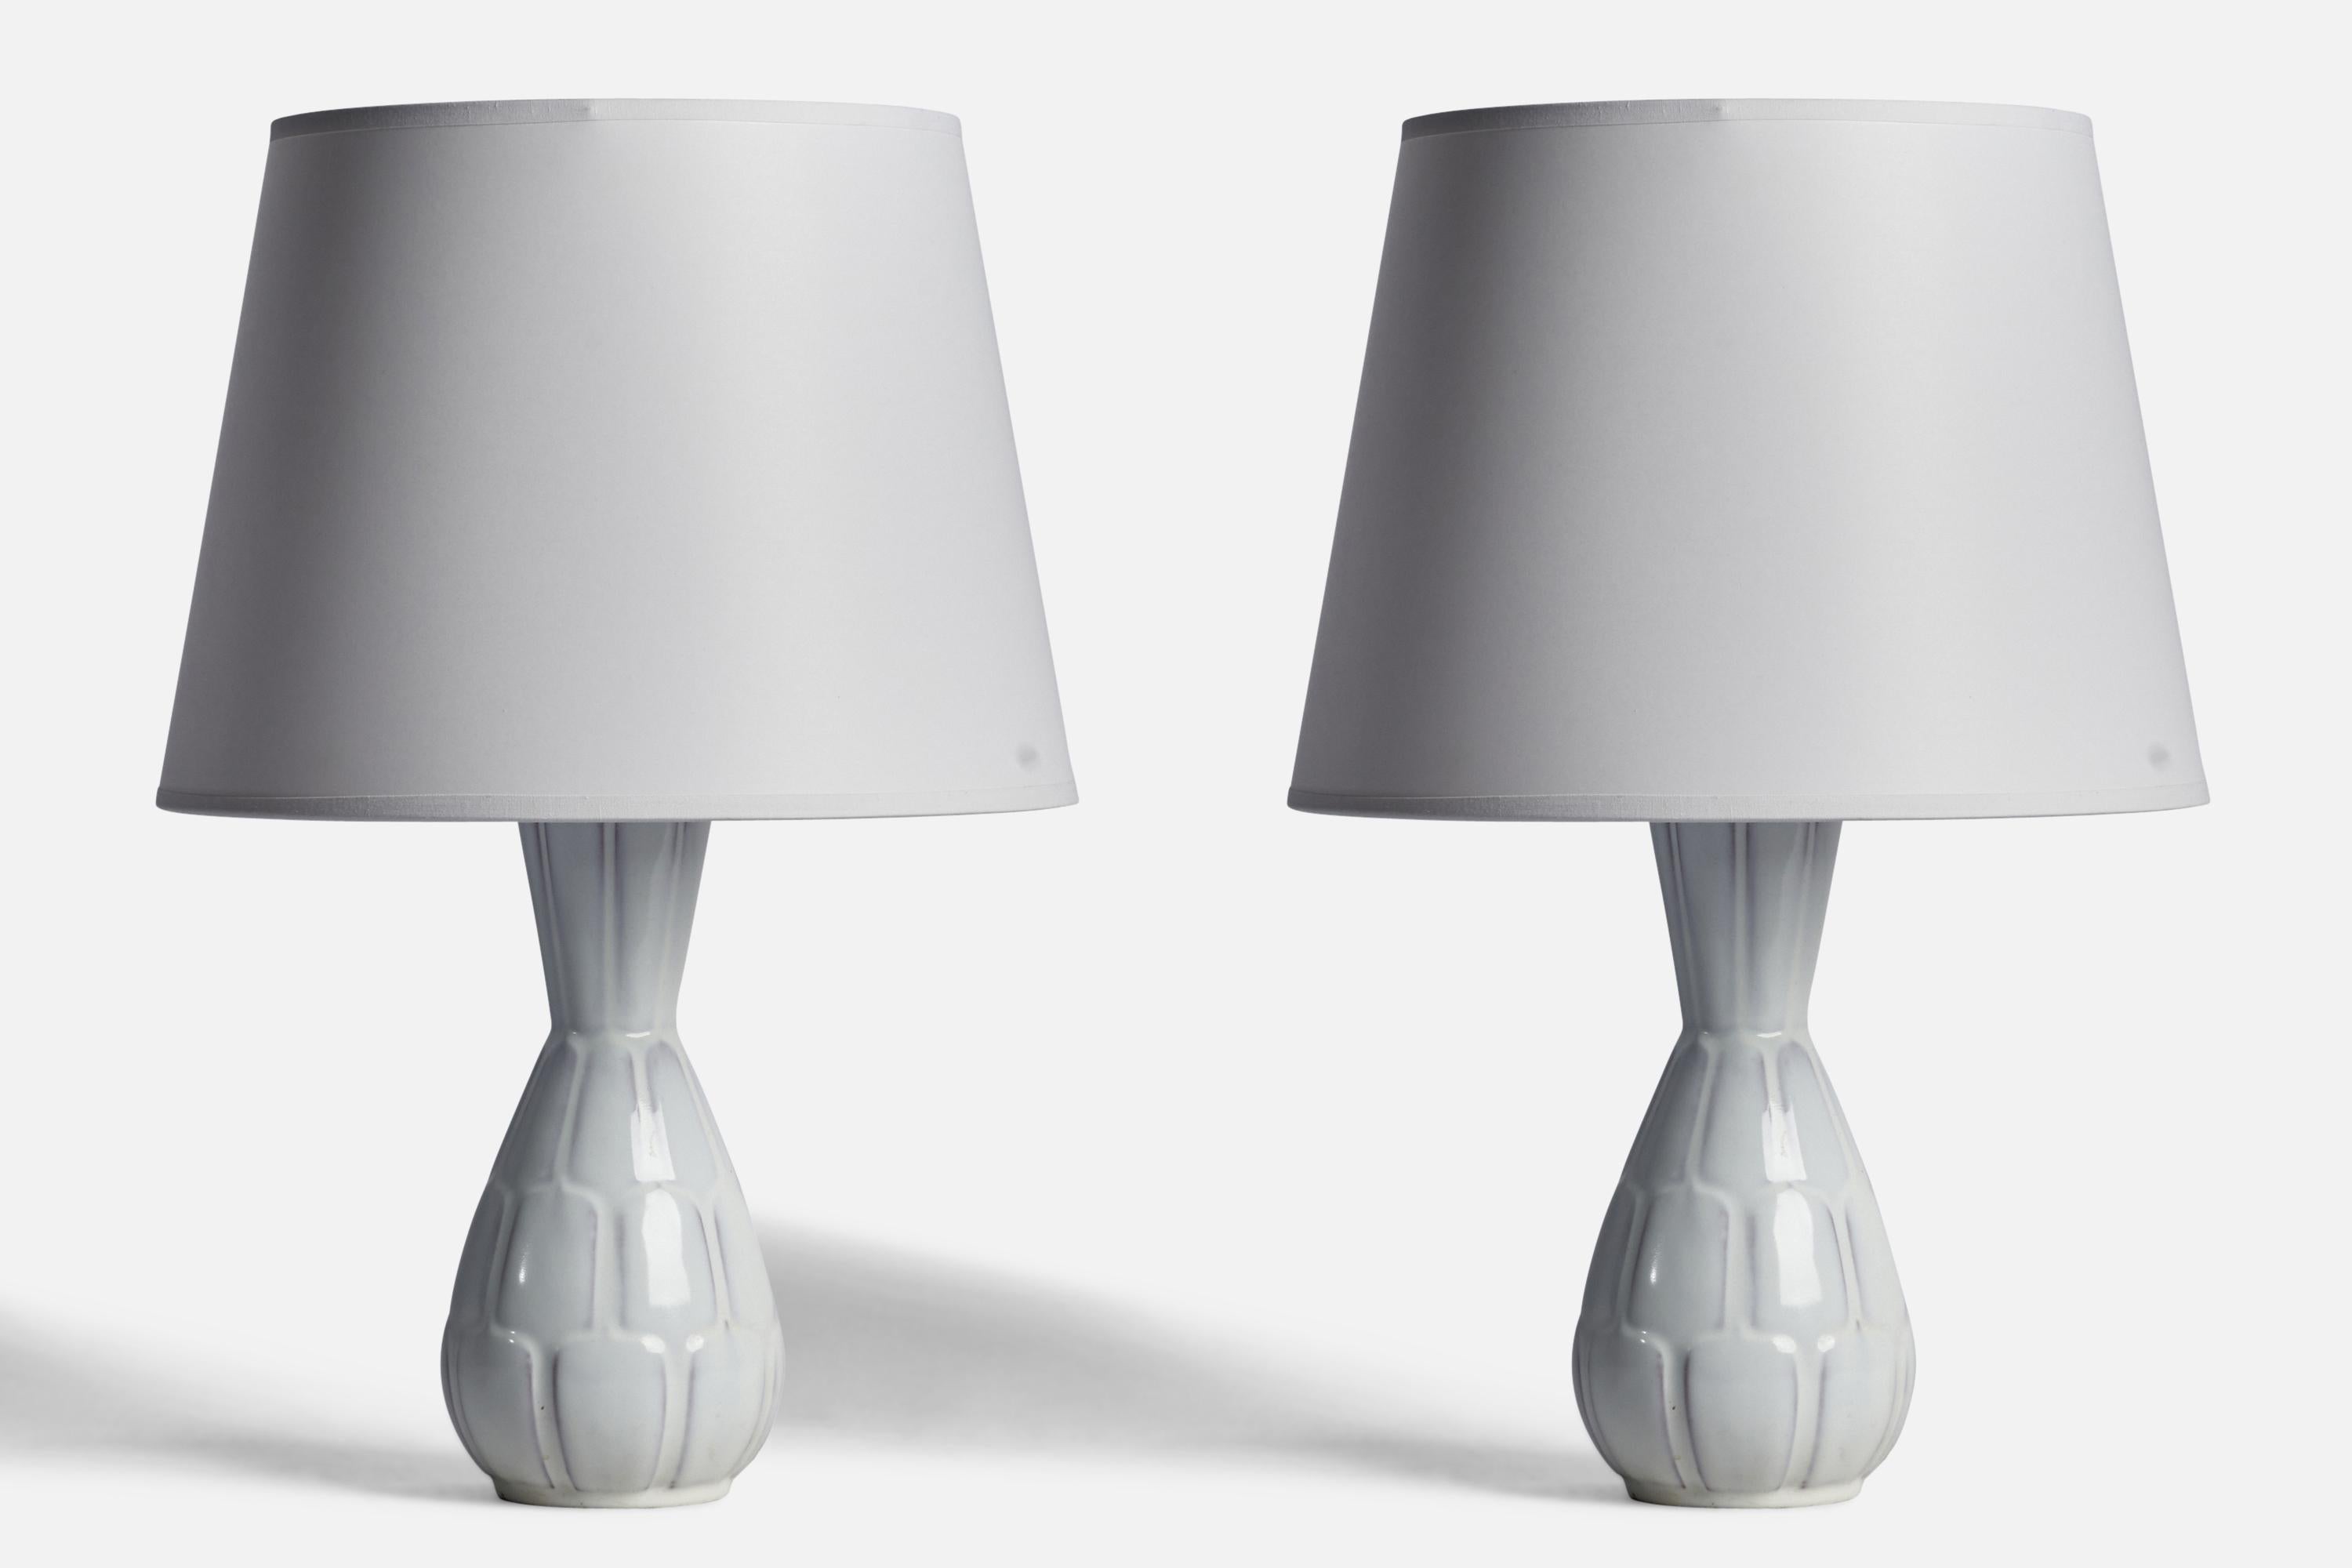 A pair of white-glazed earthenware table lamps designed by Anna-Lisa Thomson and produced by Upsala Ekeby, Sweden, 1930s.

Dimensions of Lamp (inches): 12” H x 4.5” Diameter
Dimensions of Shade (inches): 8.75” Top Diameter x 12” Bottom Diameter x 9”